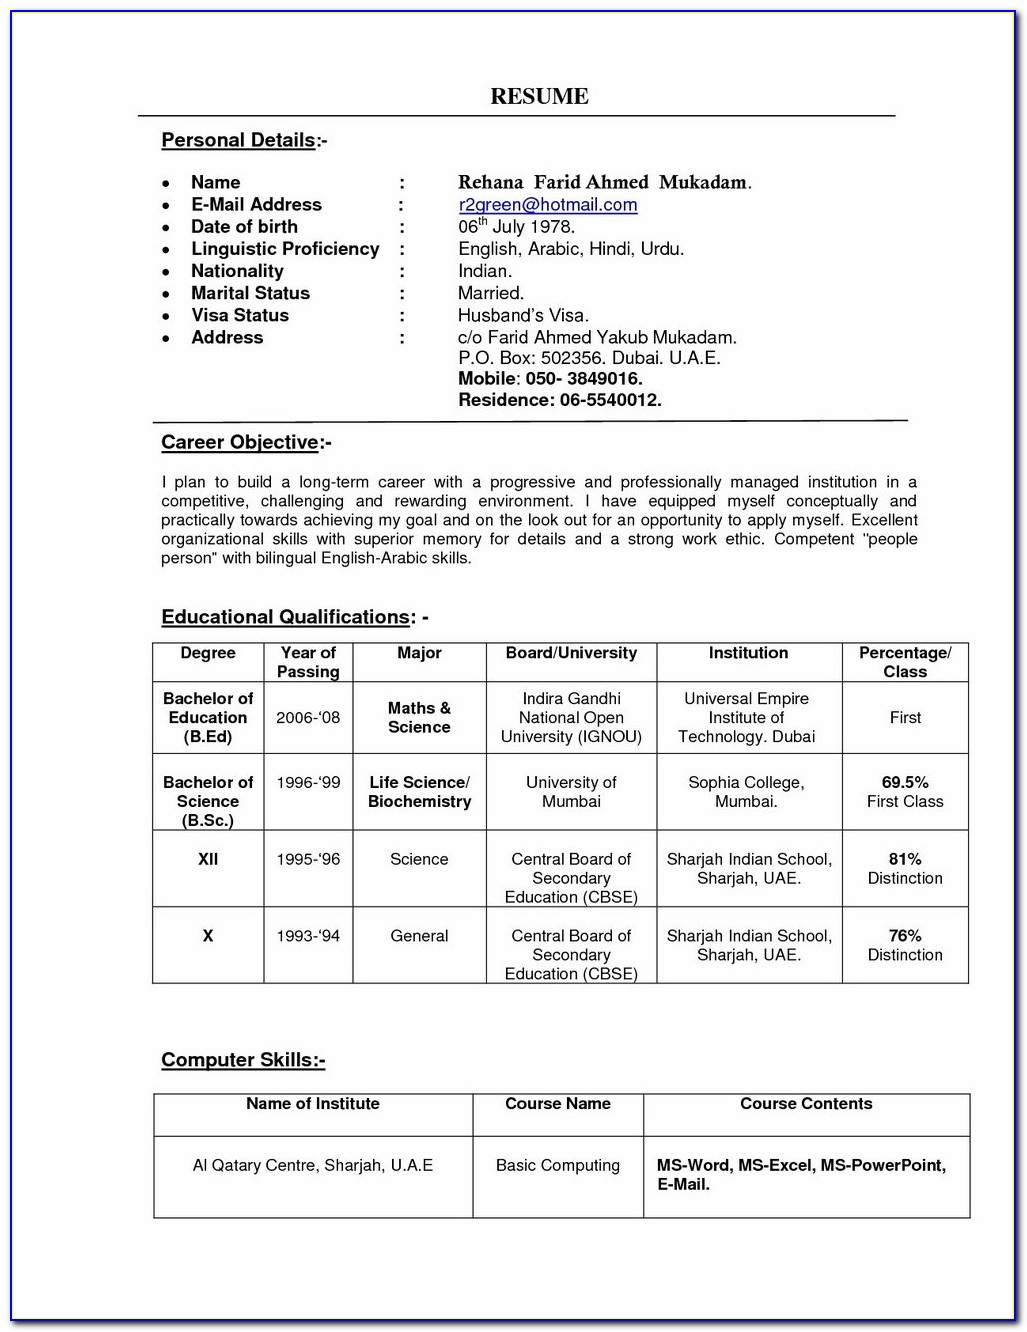 Resume Format Free Download In Ms Word 2017